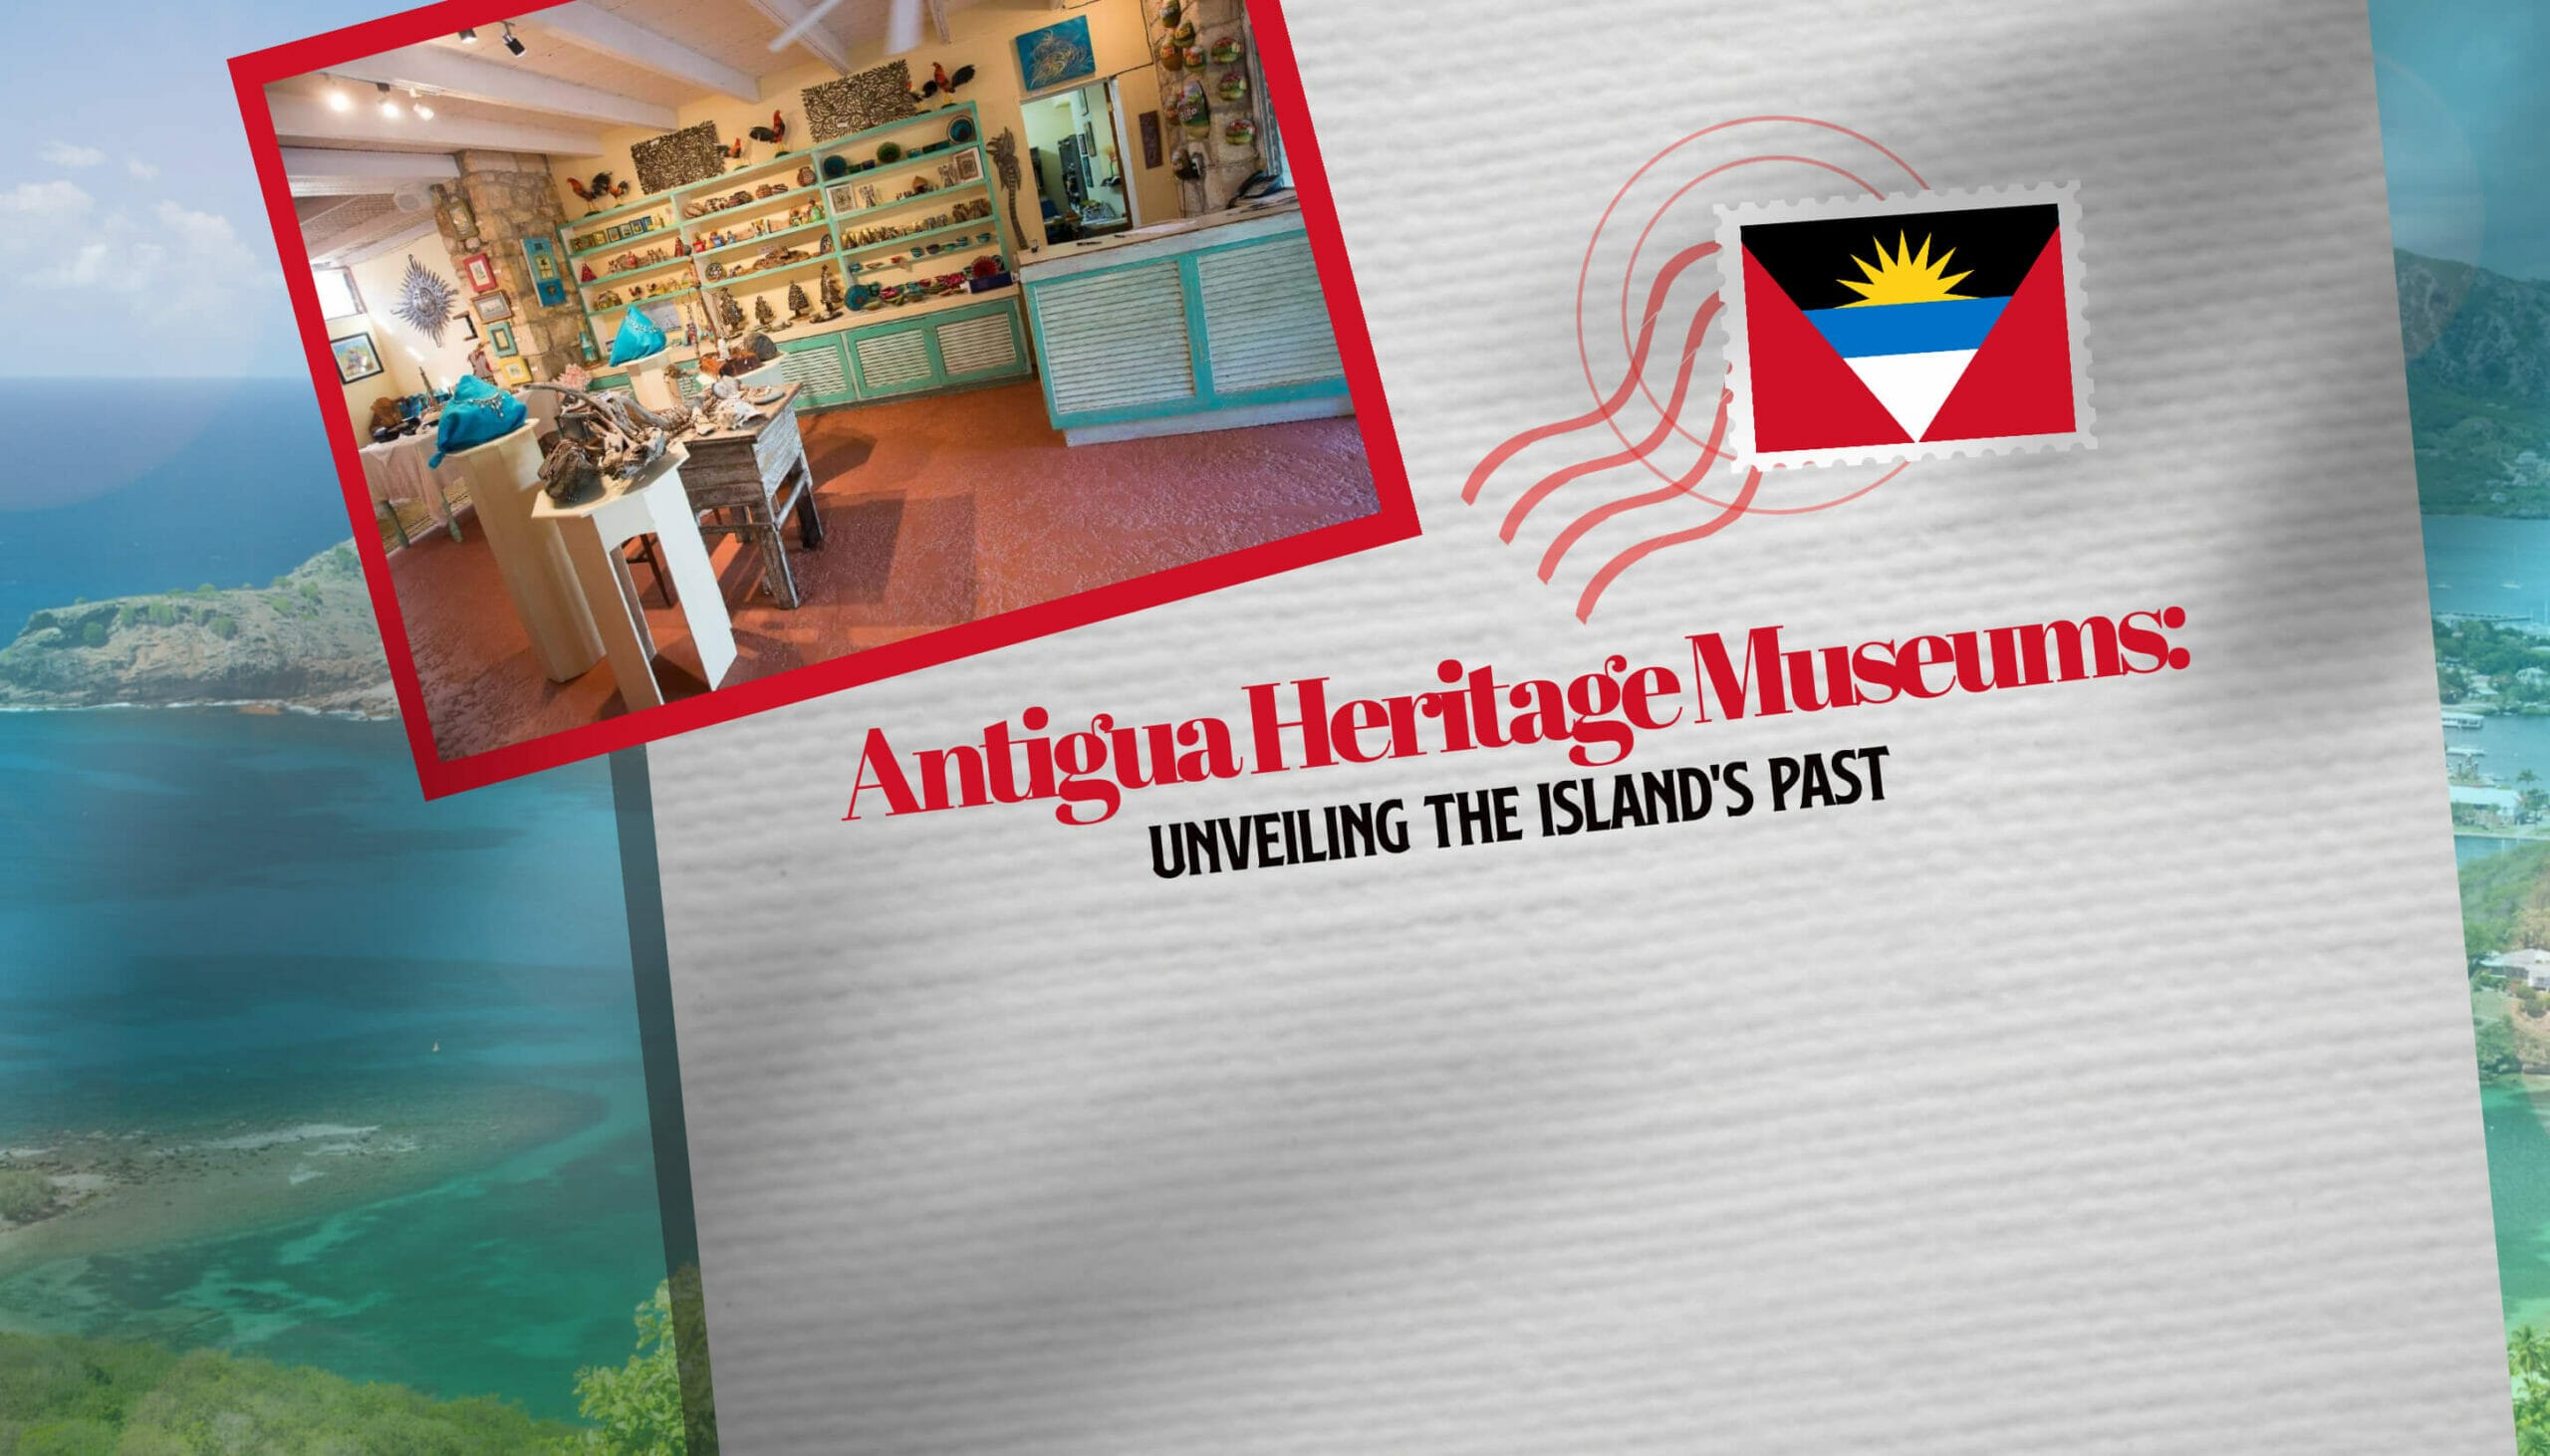 Antigua Heritage Museums Unveiling the Island's Past